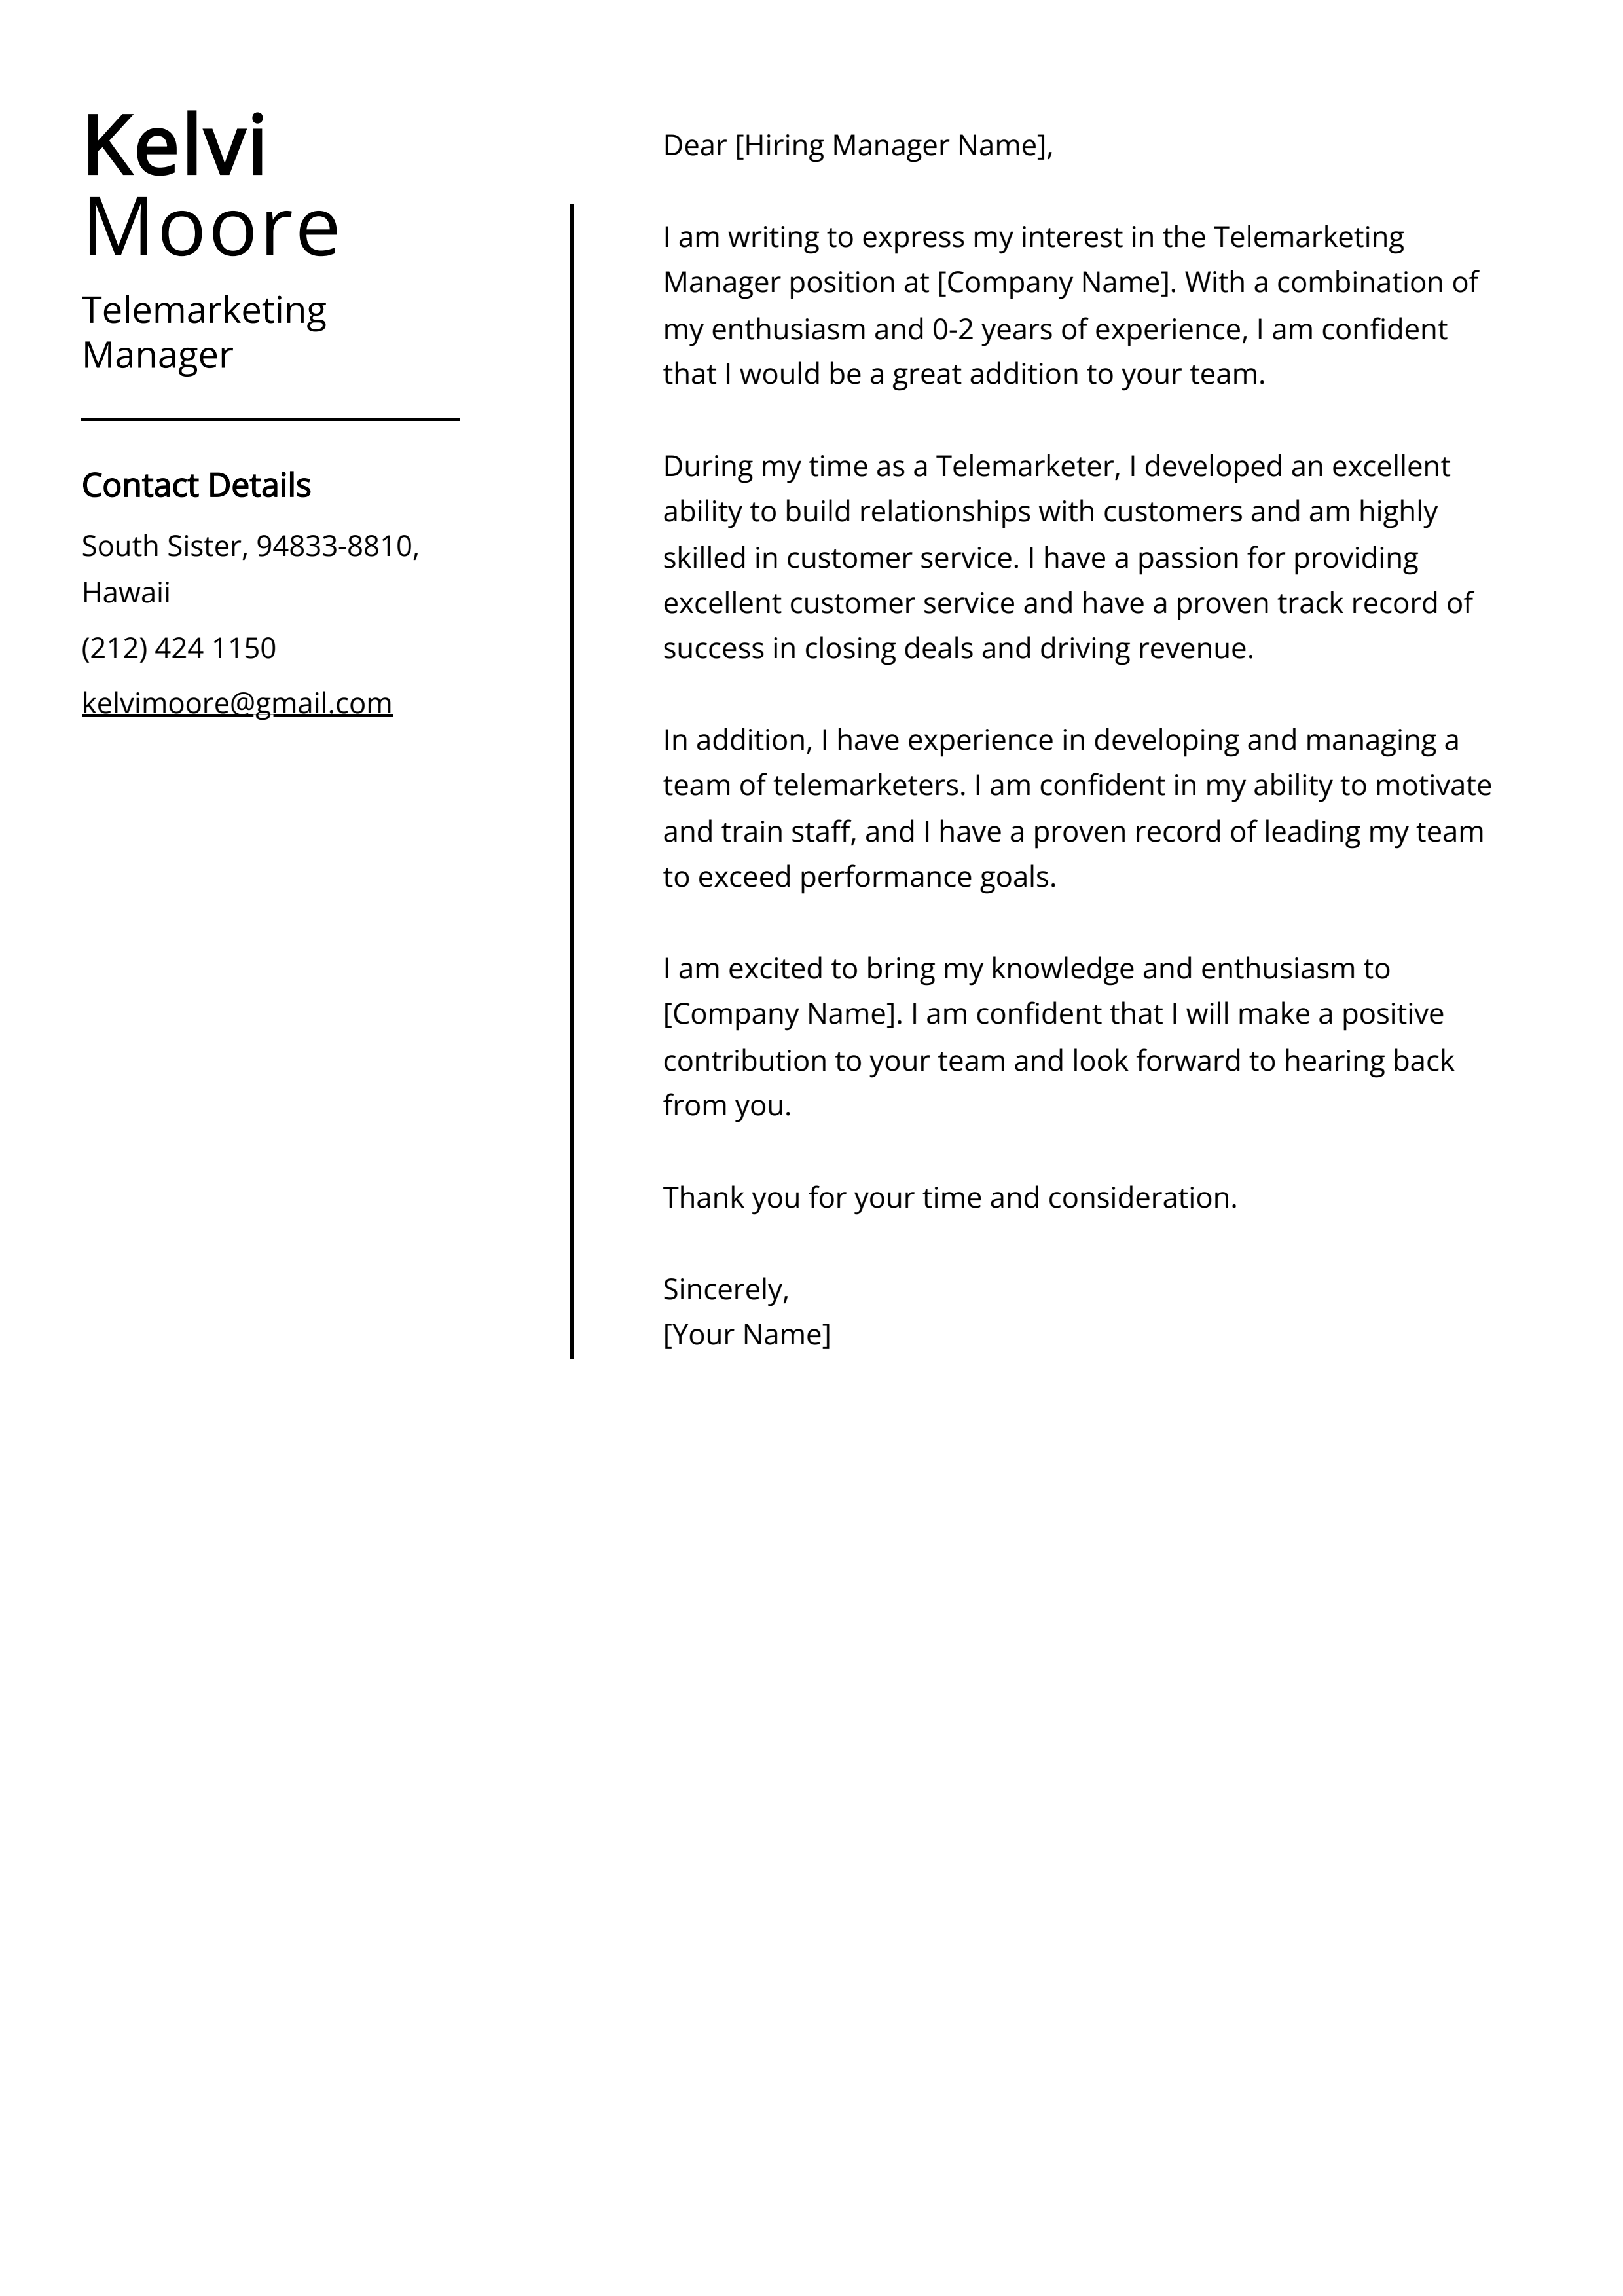 Telemarketing Manager Cover Letter Example